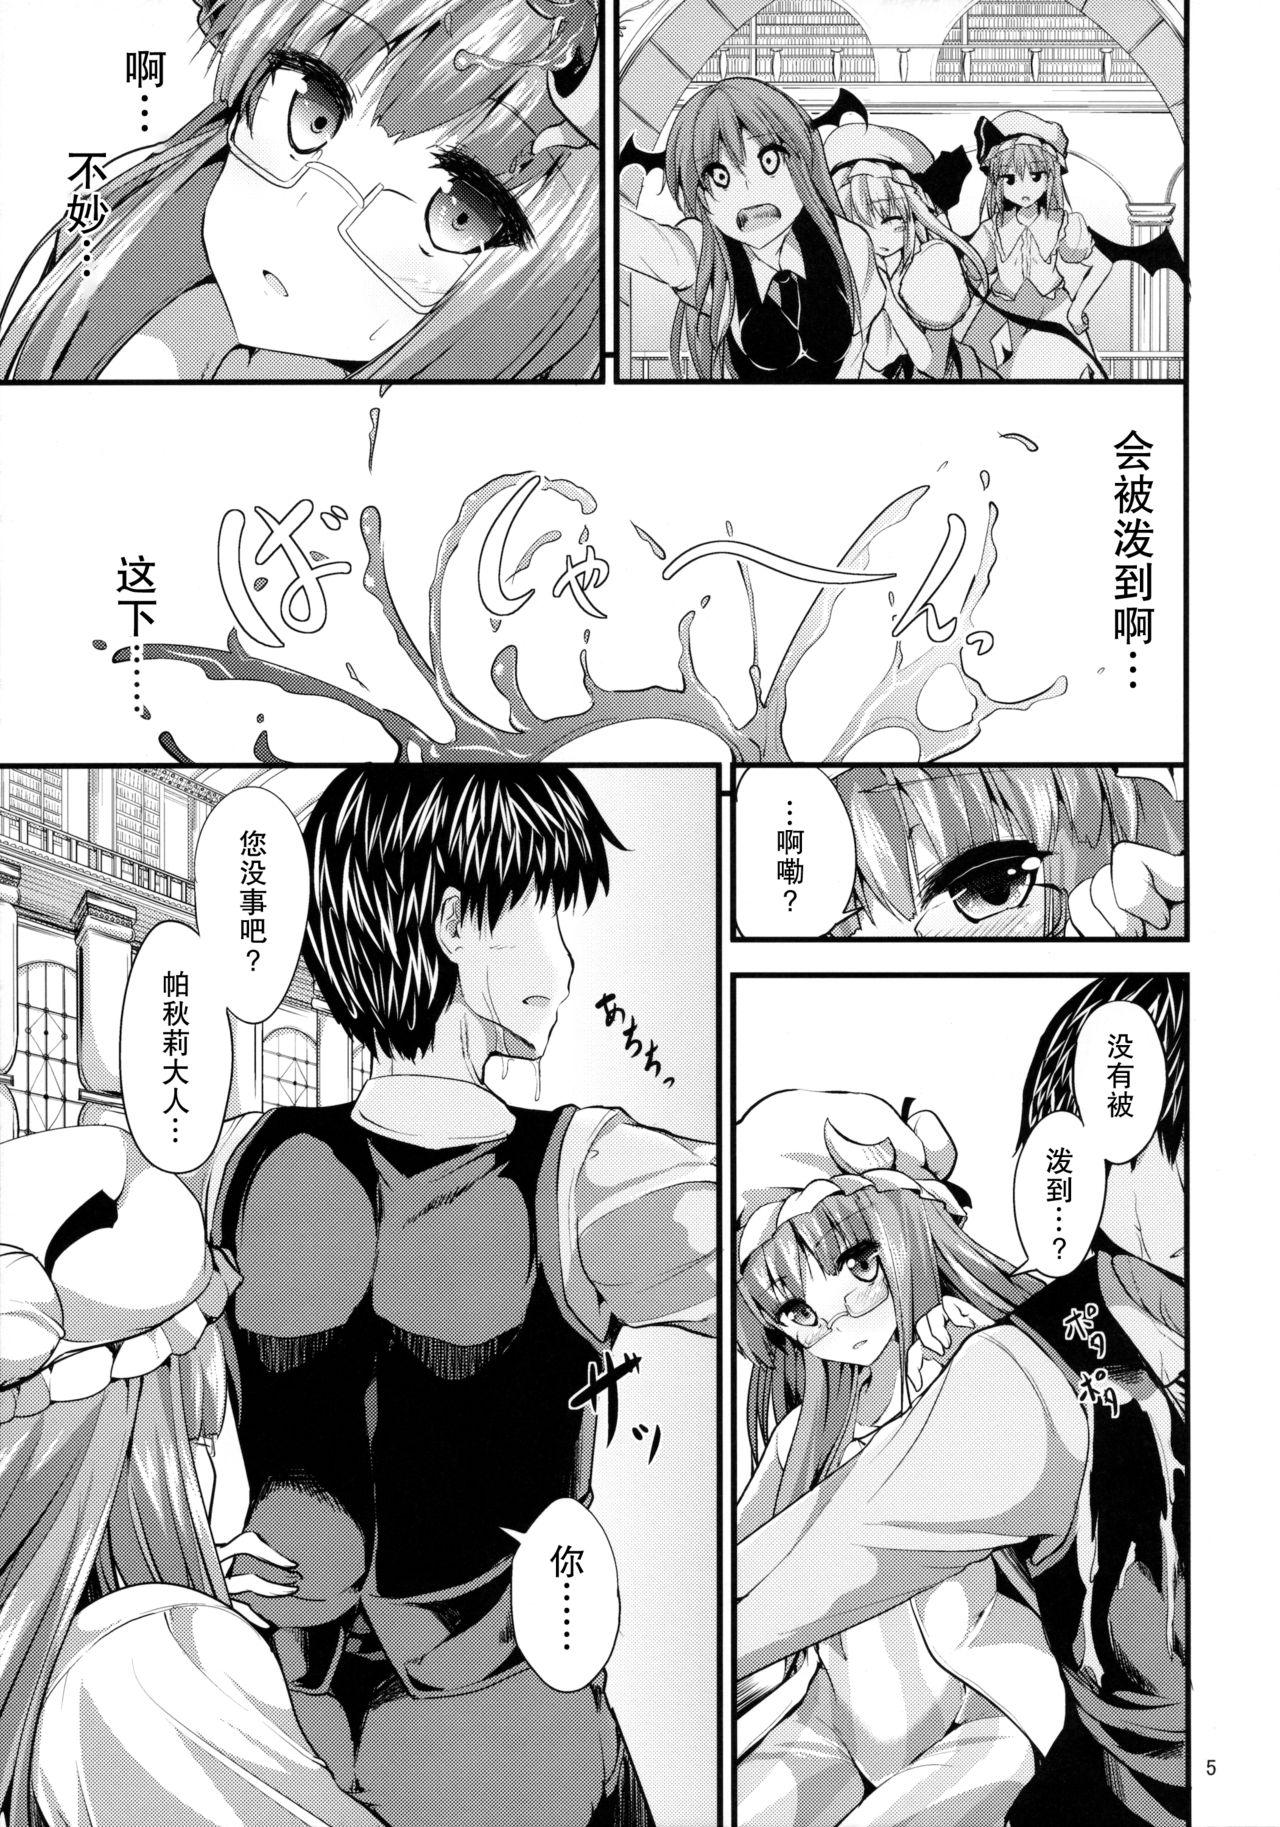 Perverted Awacche - Touhou project Fisting - Page 5